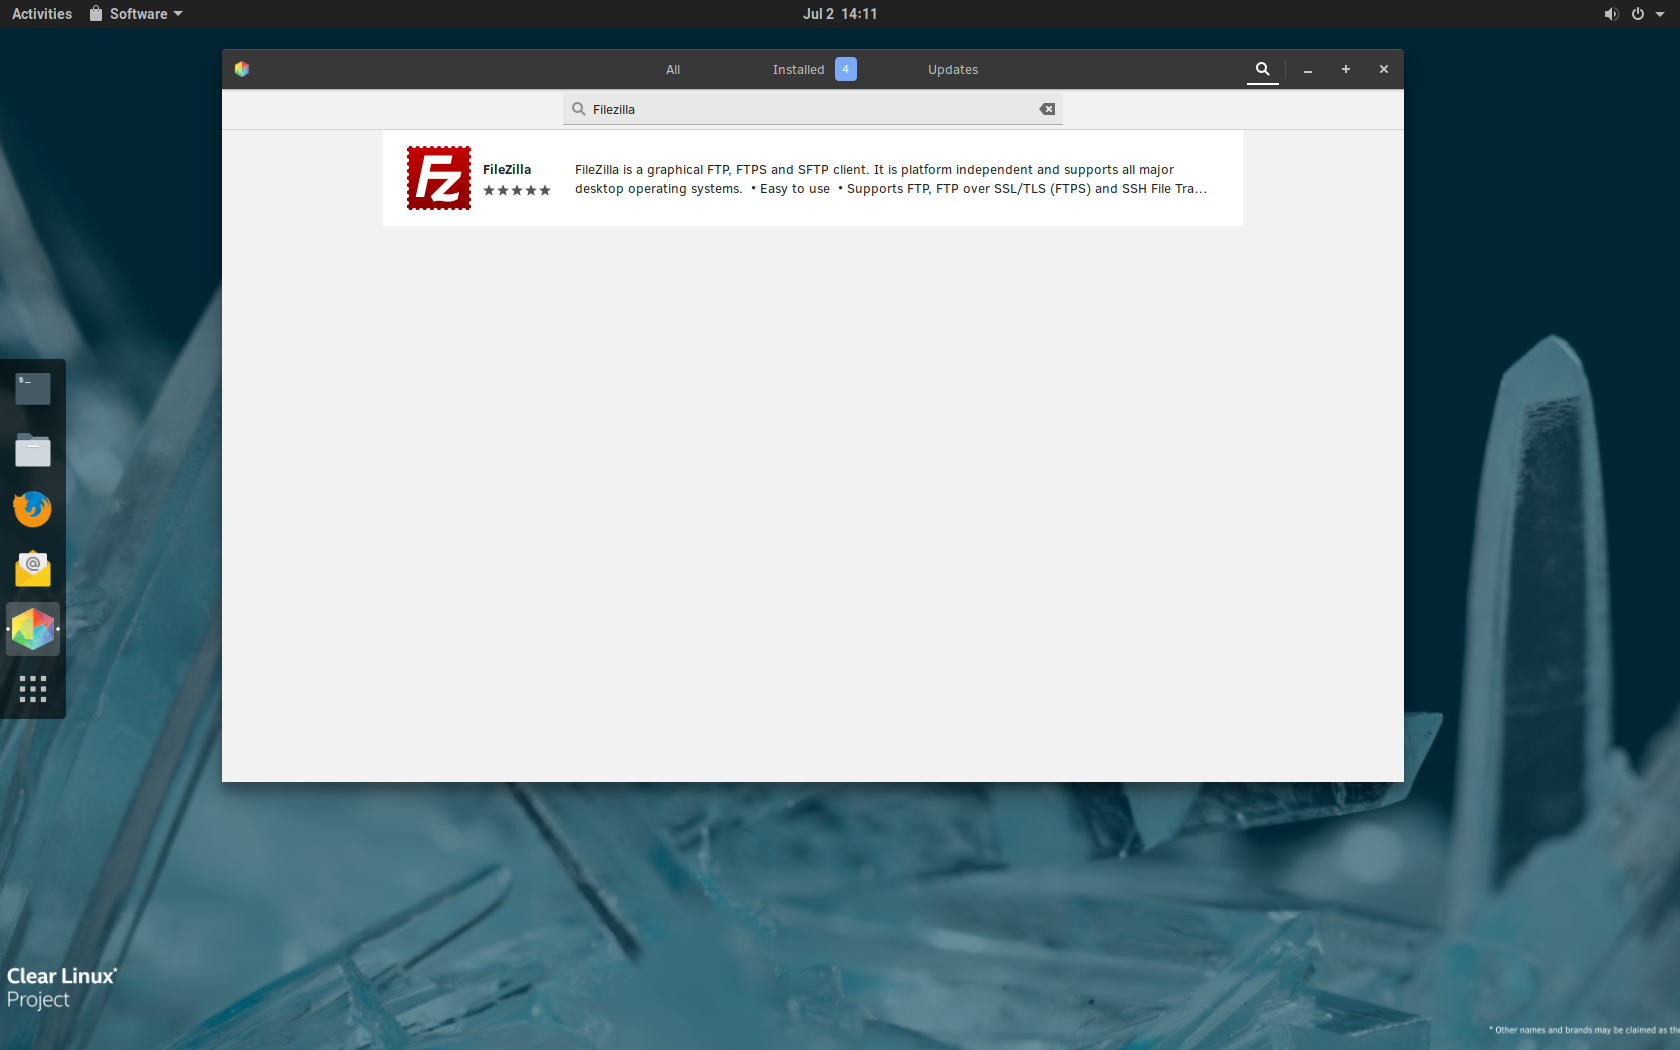 Searching for Filezilla app in Gnome Software